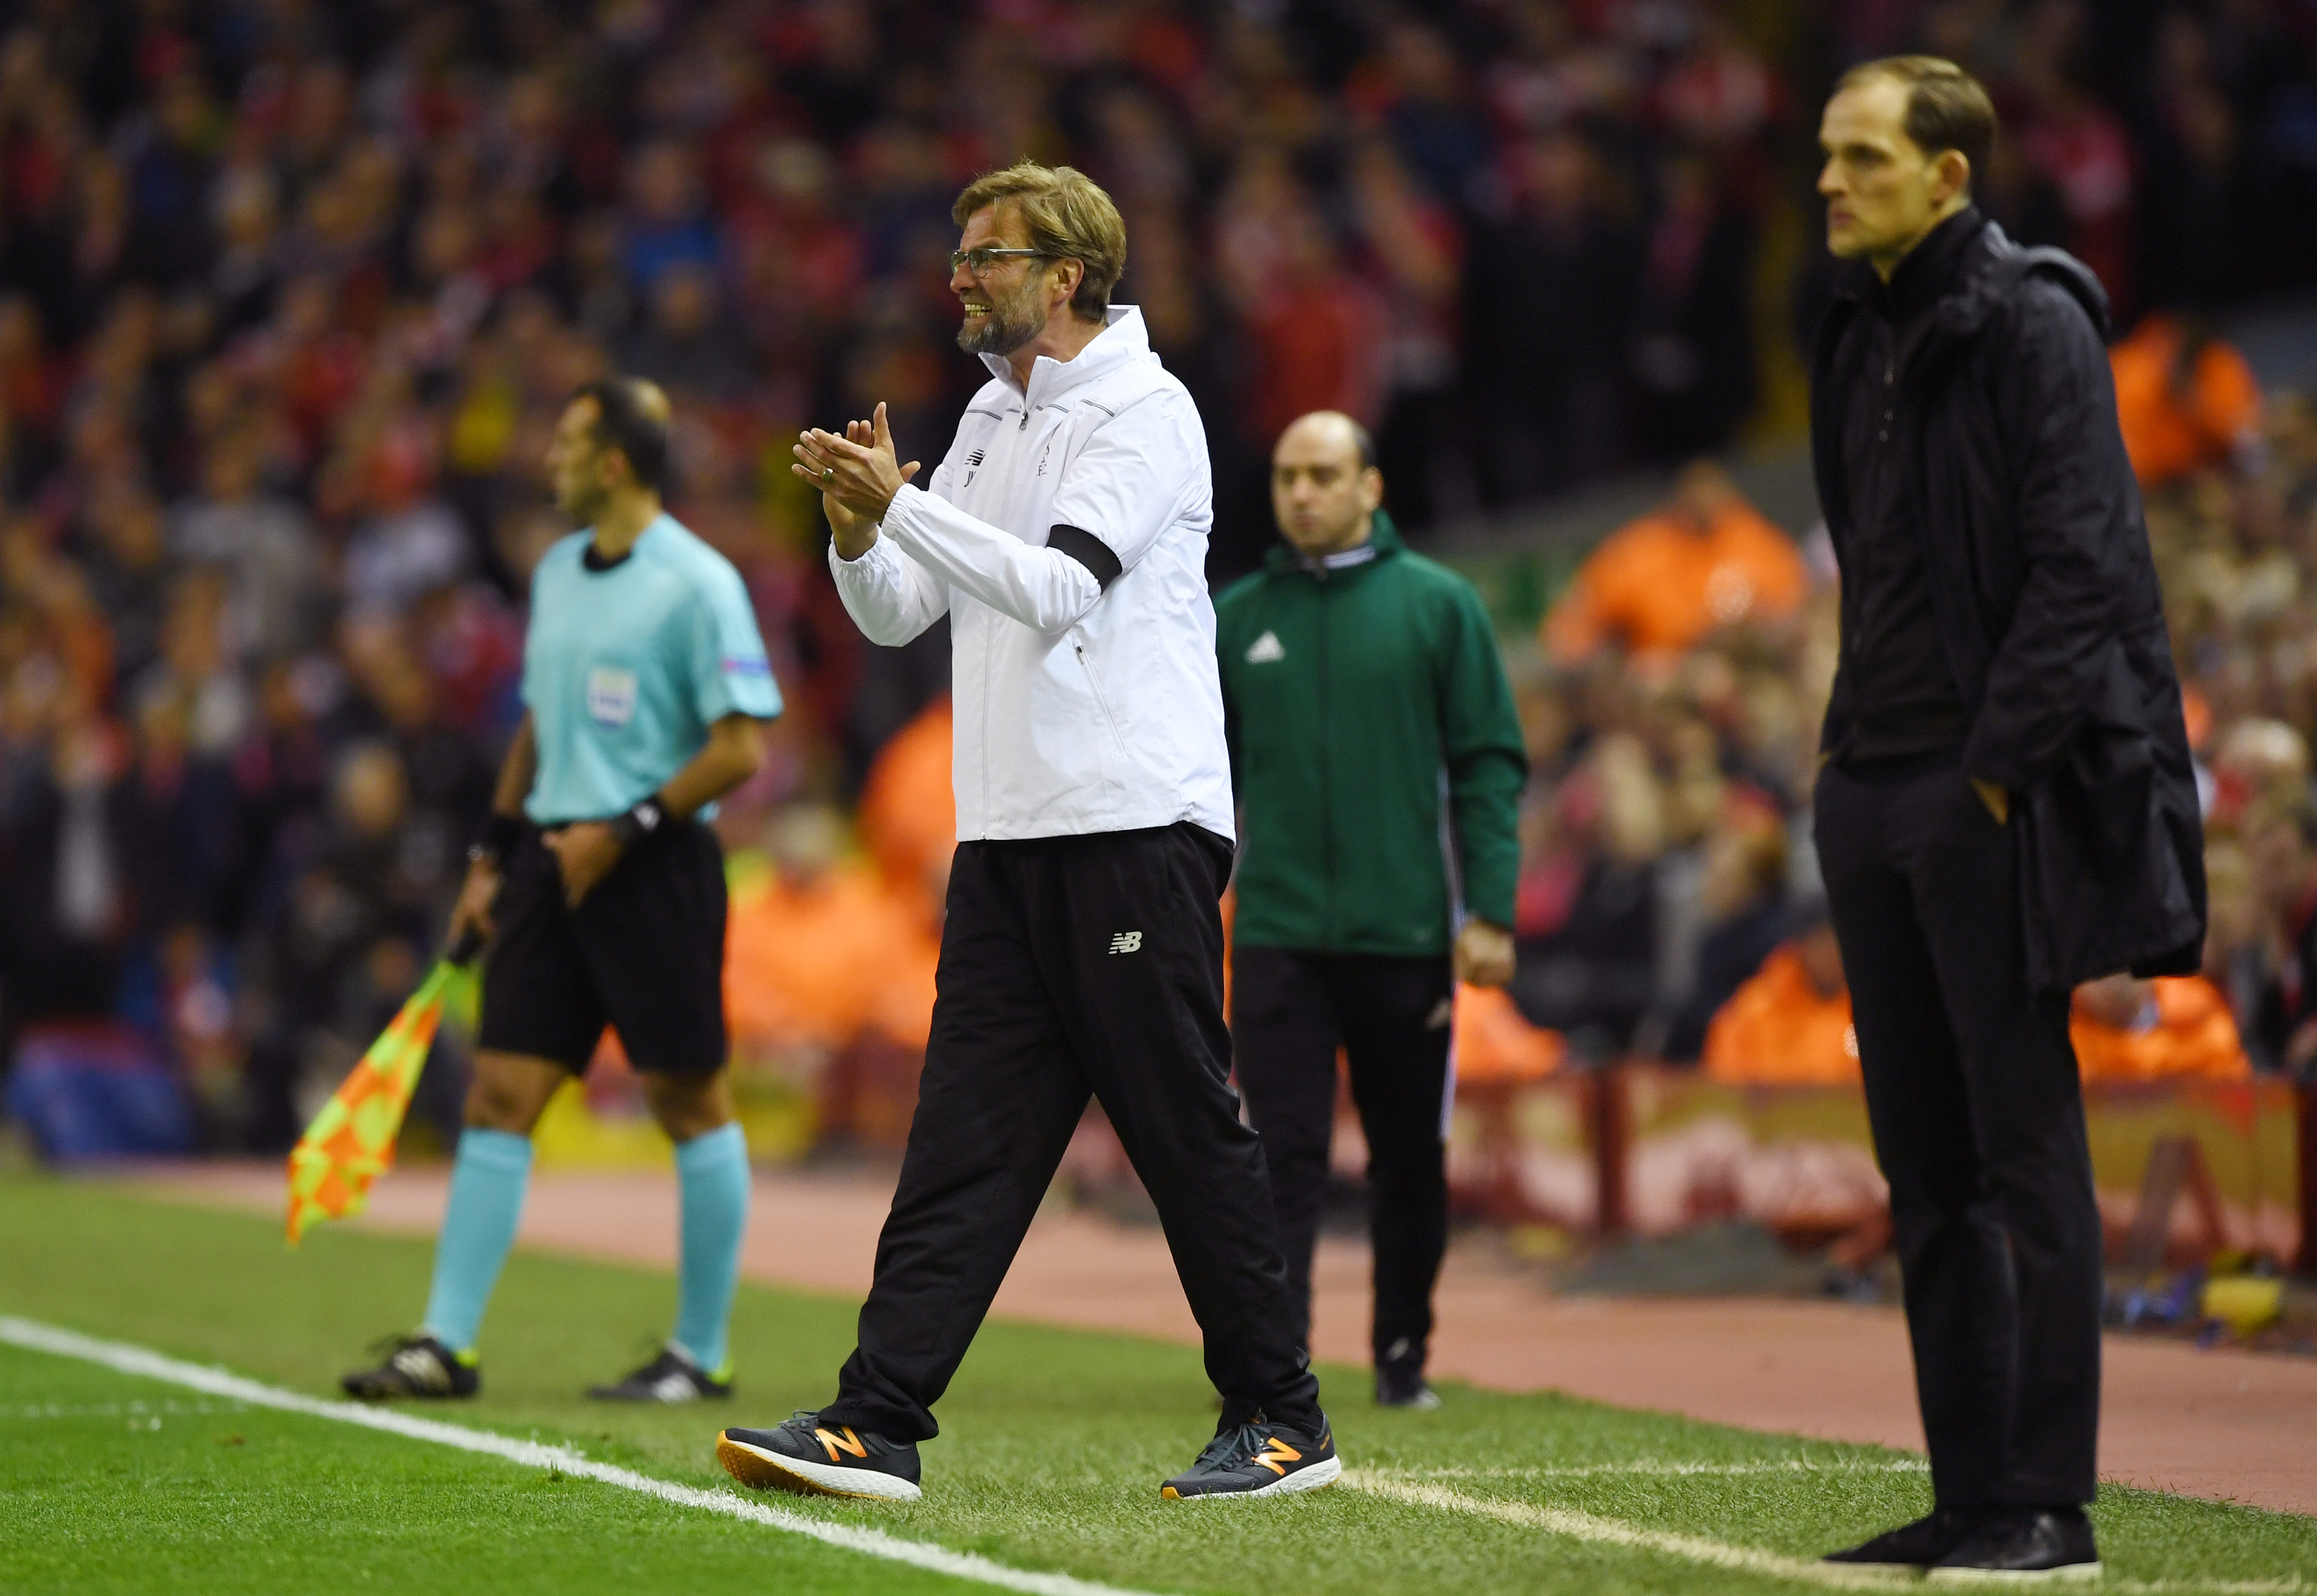 LIVERPOOL, ENGLAND - APRIL 14: Jurgen Klopp, manager of Liverpool encourages his team with Thomas Tuchel, coach of Borussia Dortmund during the UEFA Europa League quarter final, second leg match between Liverpool and Borussia Dortmund at Anfield on April 14, 2016 in Liverpool, United Kingdom.  (Photo by Shaun Botterill/Getty Images)